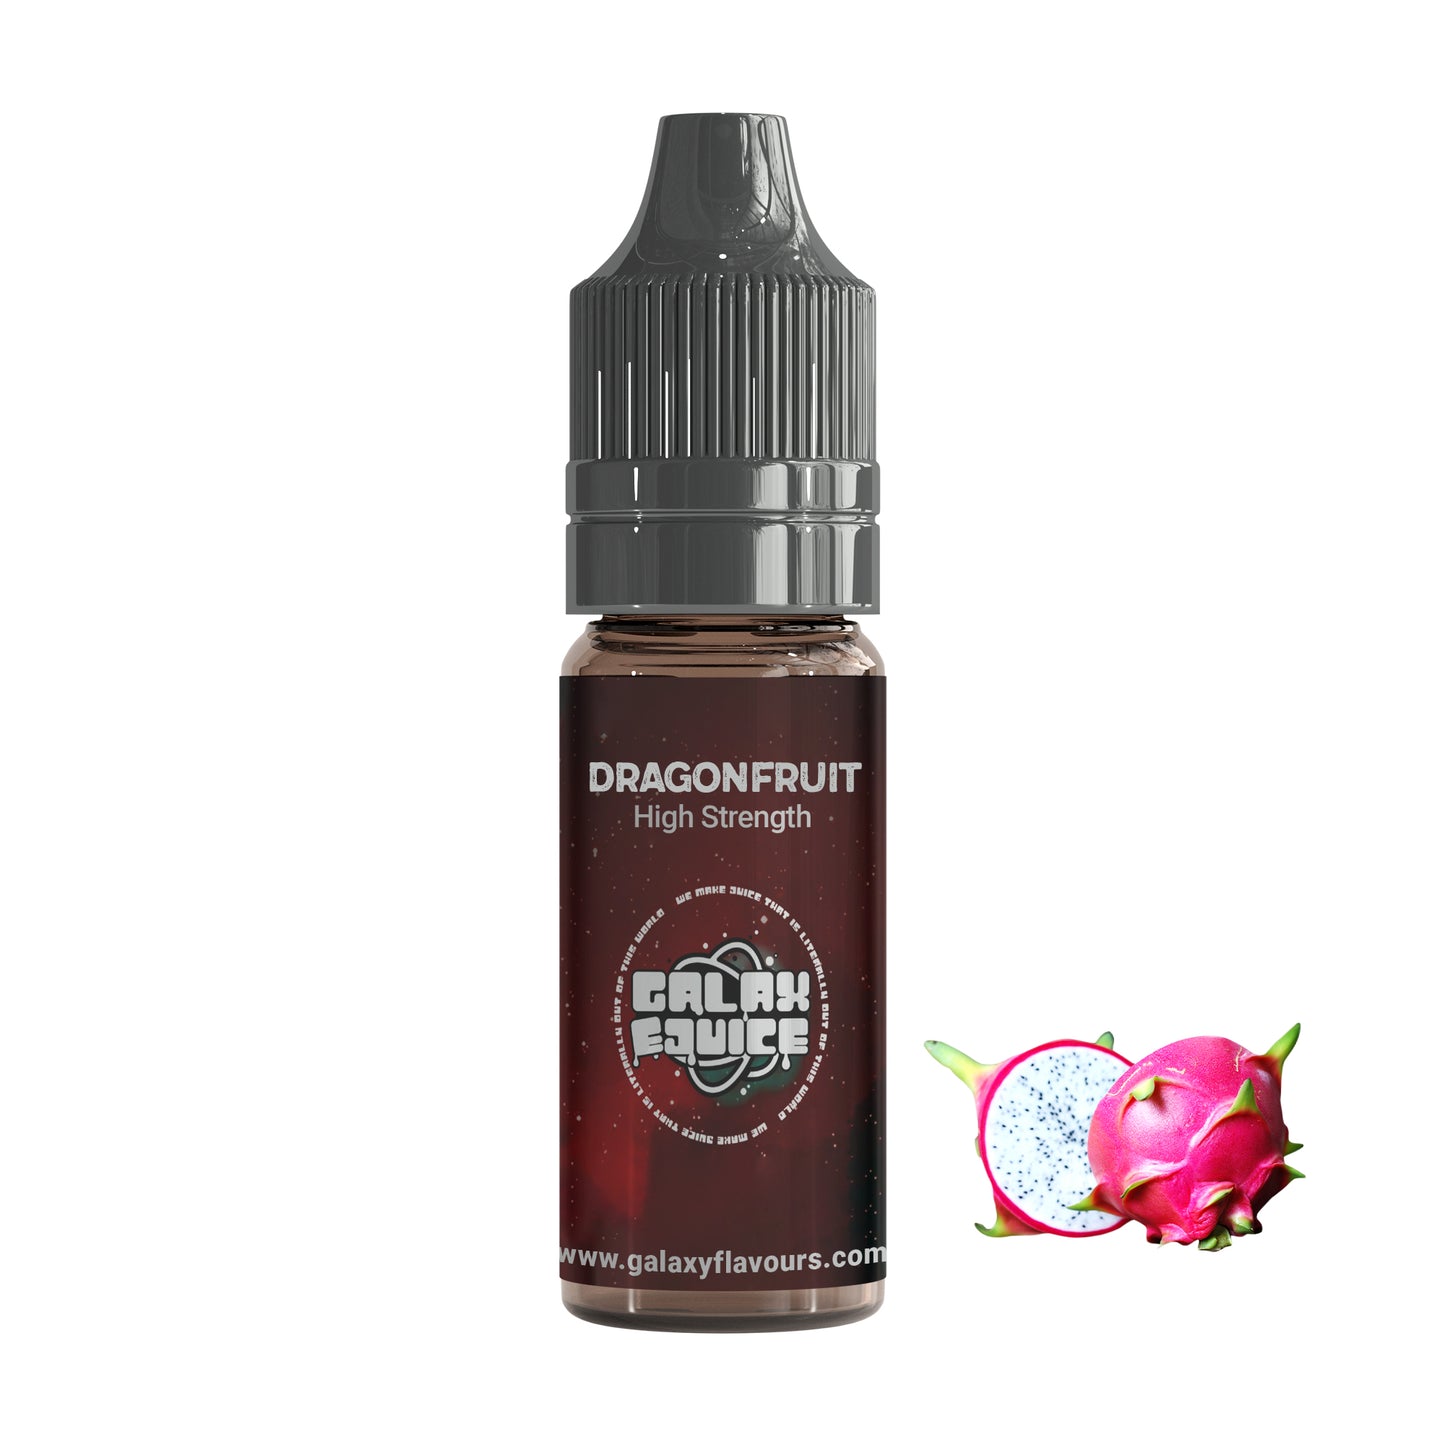 Dragonfruit High Strength Professional Flavouring.